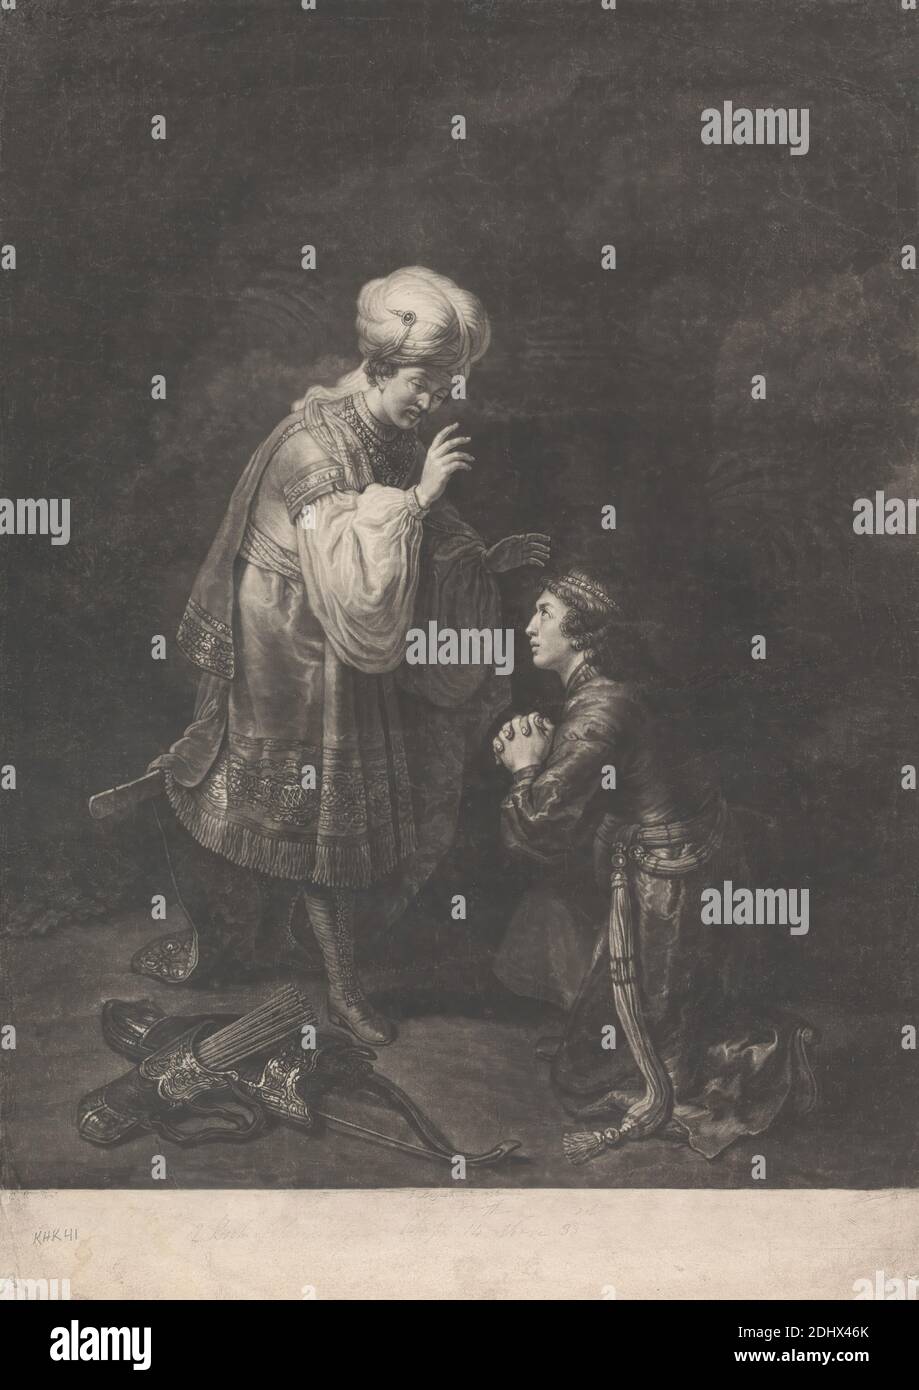 Absalom's Submission to his Father, King David, Print made by Johann Gottfried Haid, 1704–1767, German, active in Britain, after Ferdinand Bol, 1616–1680, Dutch, Published by John Boydell, 1720–1804, British, 1766, Mezzotint on moderately thick, slightly textured, beige laid paper, Sheet: 19 13/16 × 14 1/8 inches (50.4 × 35.8 cm) and Image: 17 7/8 x 14 inches (45.4 x 35.6 cm), arrows, boots, bowls, Christianity, family, father, gaze, gesturing, Judaism, kneeling, Old Testament, Oriental, quiver, reconciliation of David and Absalom; Absalom kneels before David and they embrace, religious Stock Photo